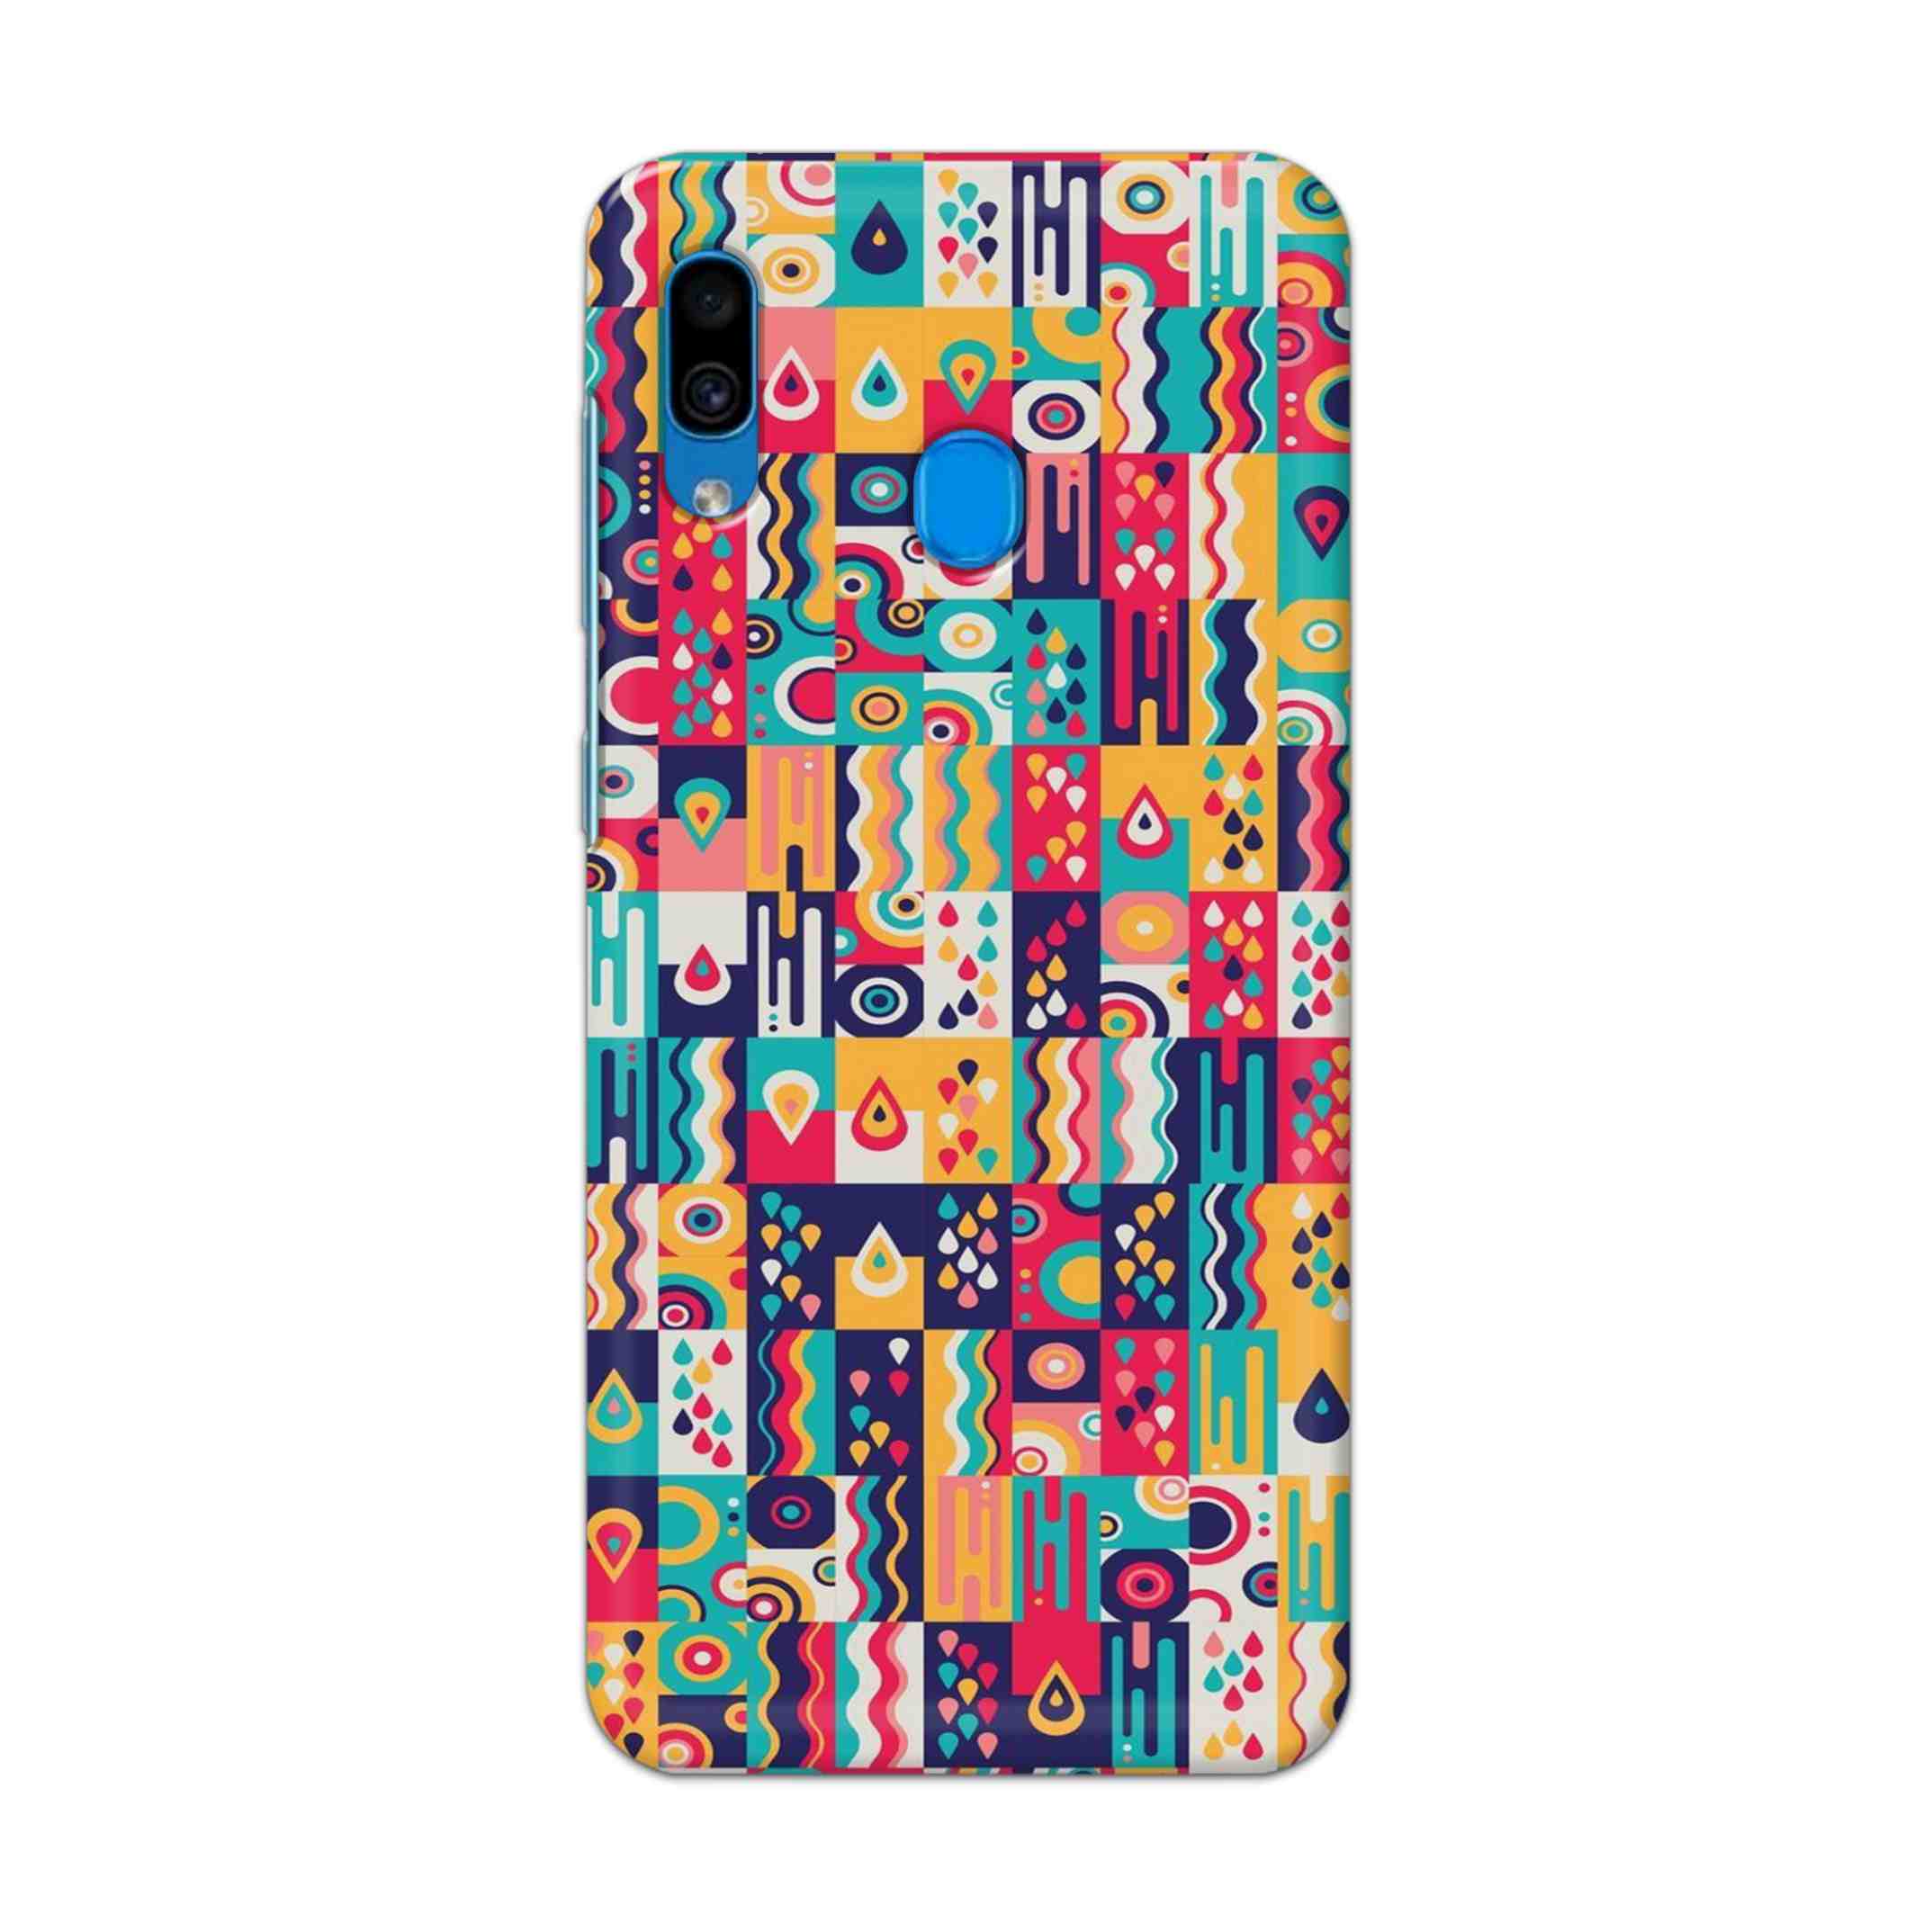 Buy Art Hard Back Mobile Phone Case Cover For Samsung Galaxy A30 Online